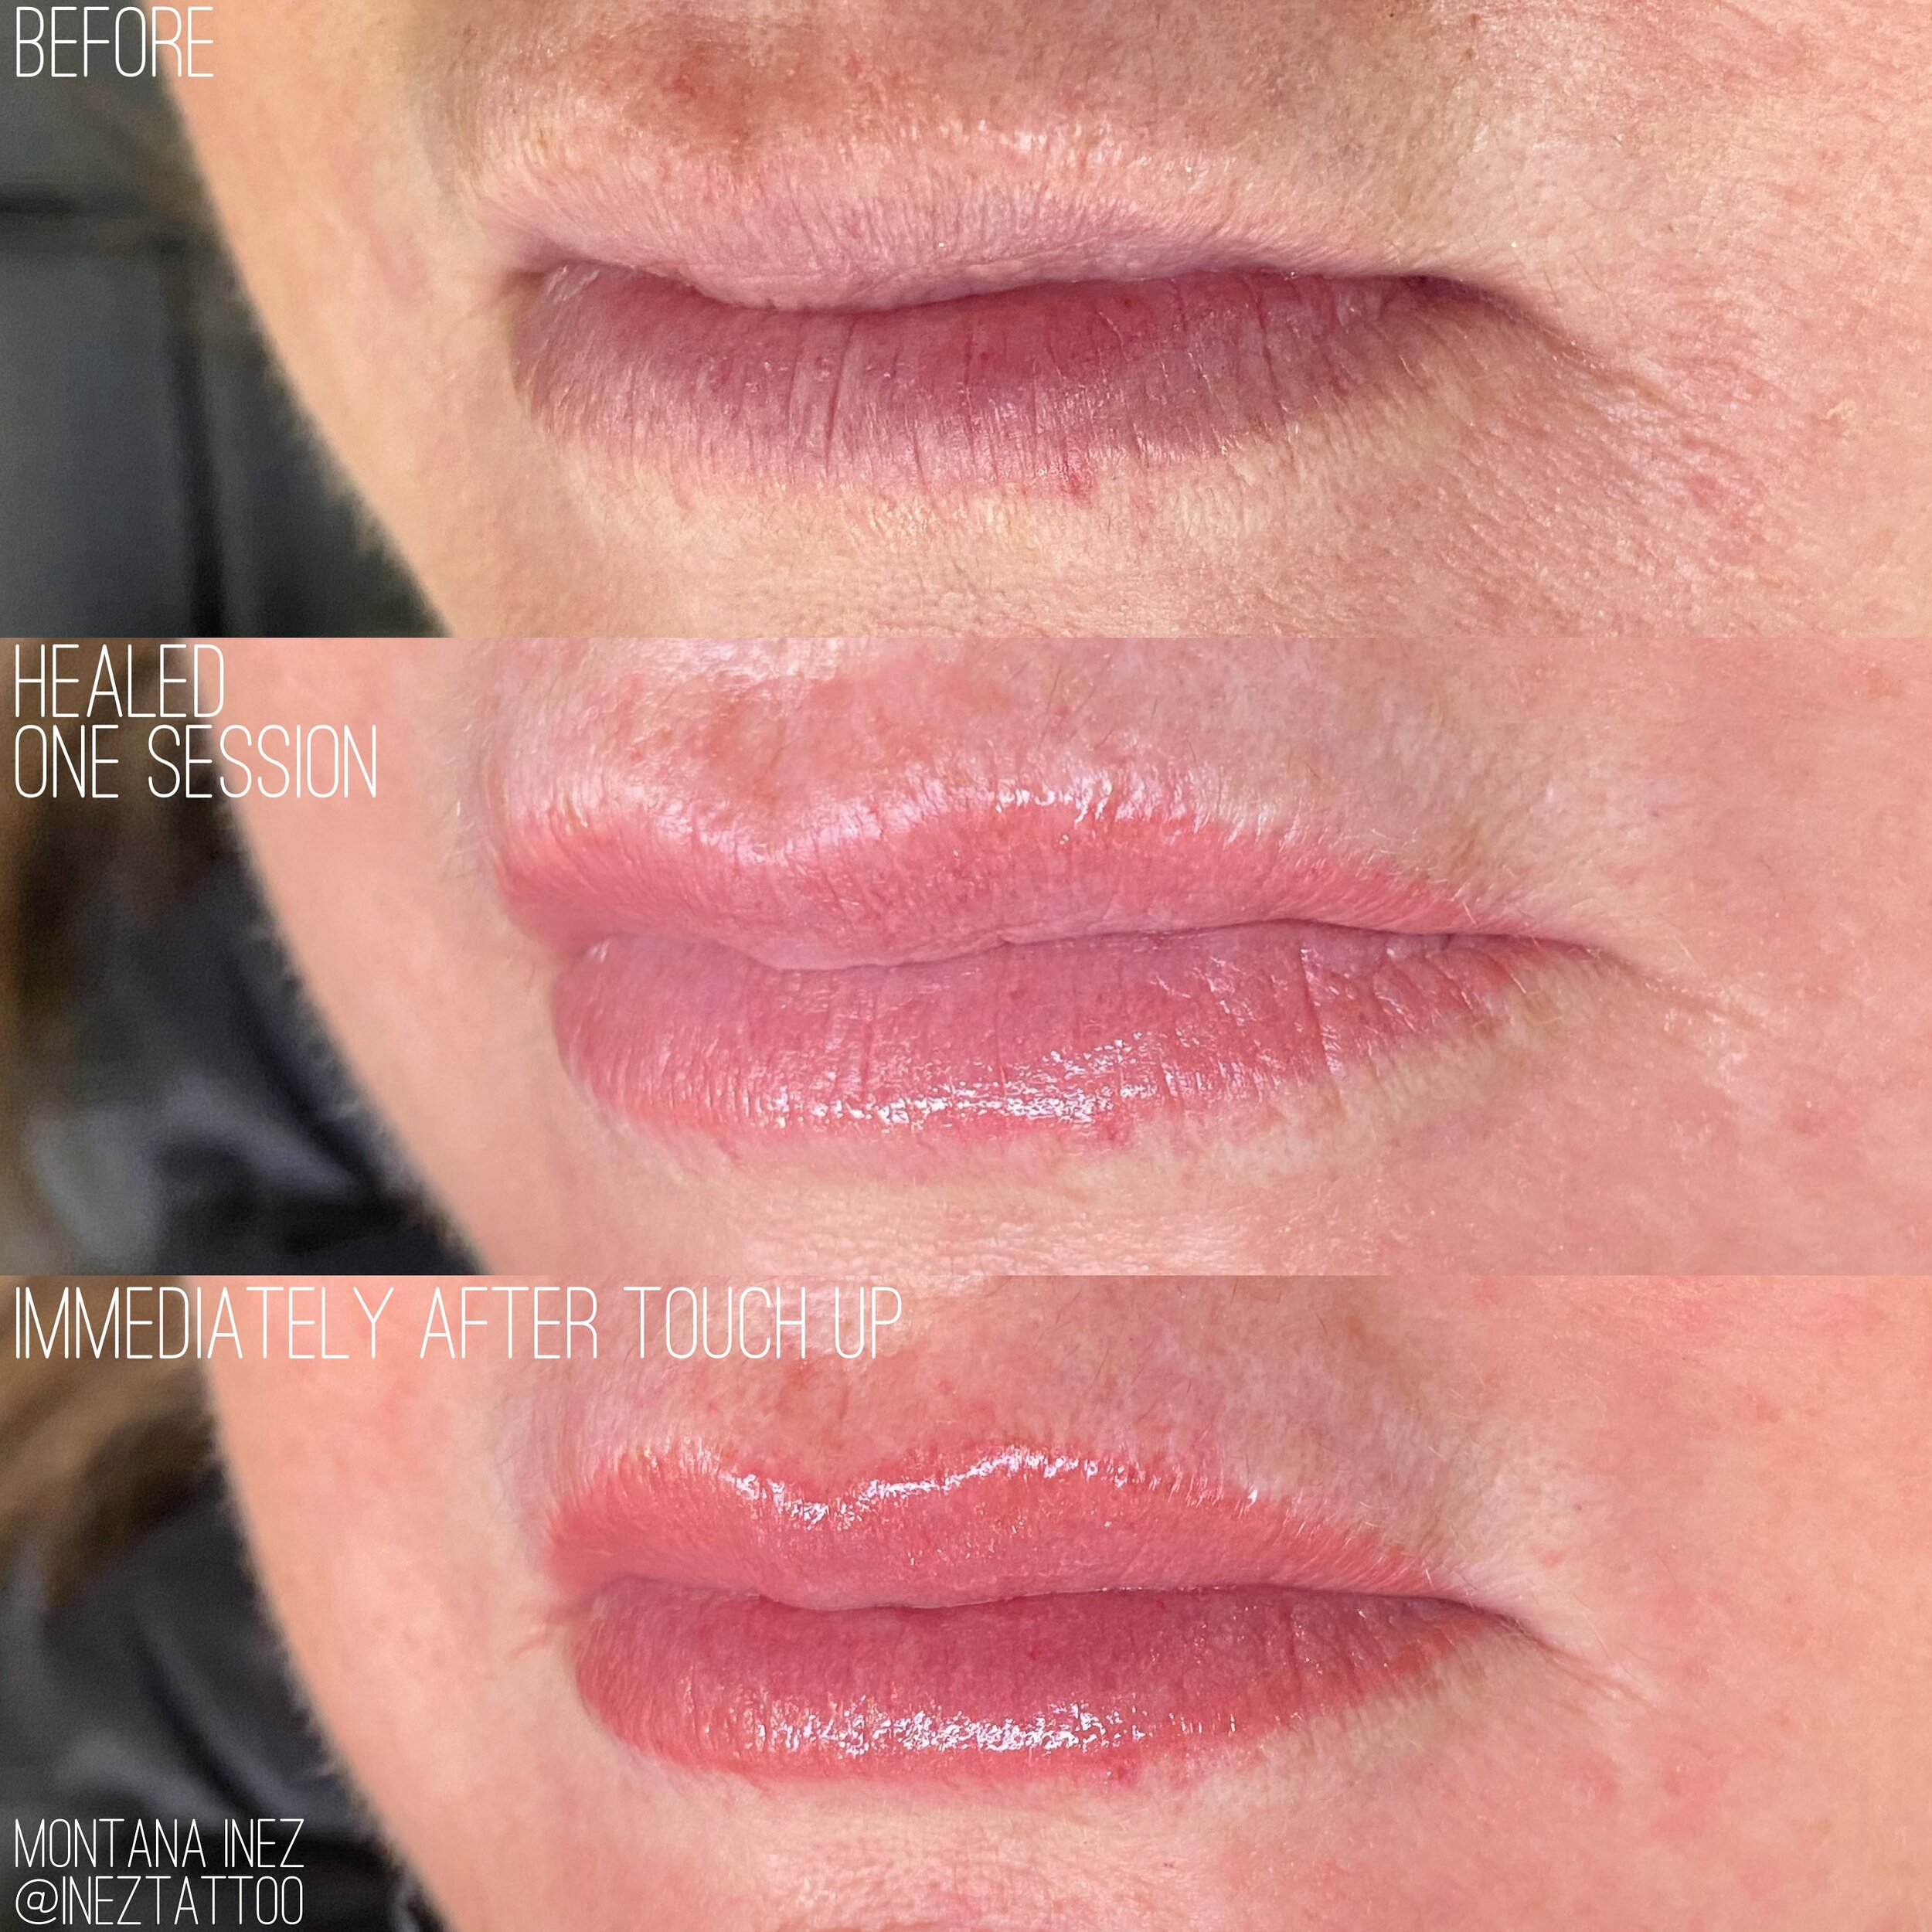 A Lip Blush journey 🕊️ 
Before ~ HEALED results after our first session ~ immediately after second session!

My sweet client and I were thrilled with the results after round 1 and just wanted more of the same natural colour, so we boosted the intens